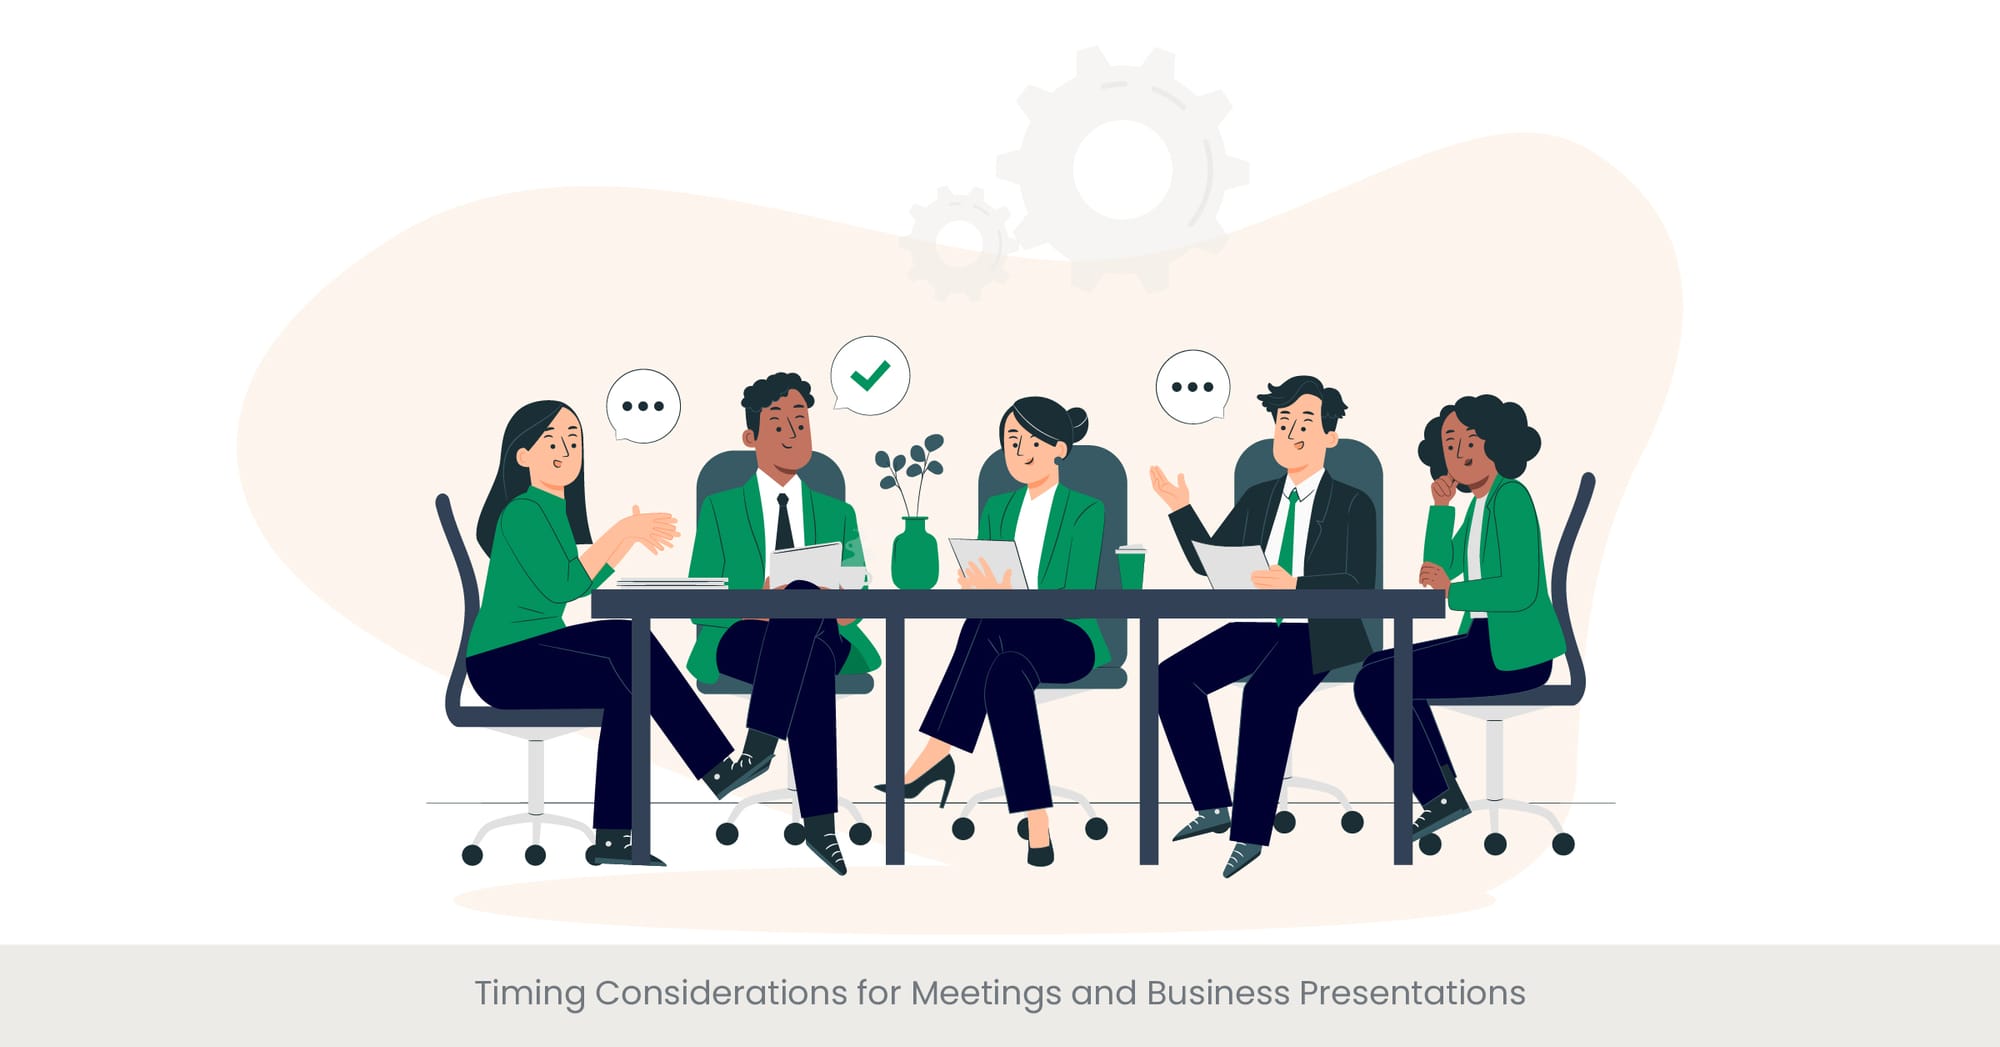 Timing Considerations for Meetings and Business Presentations